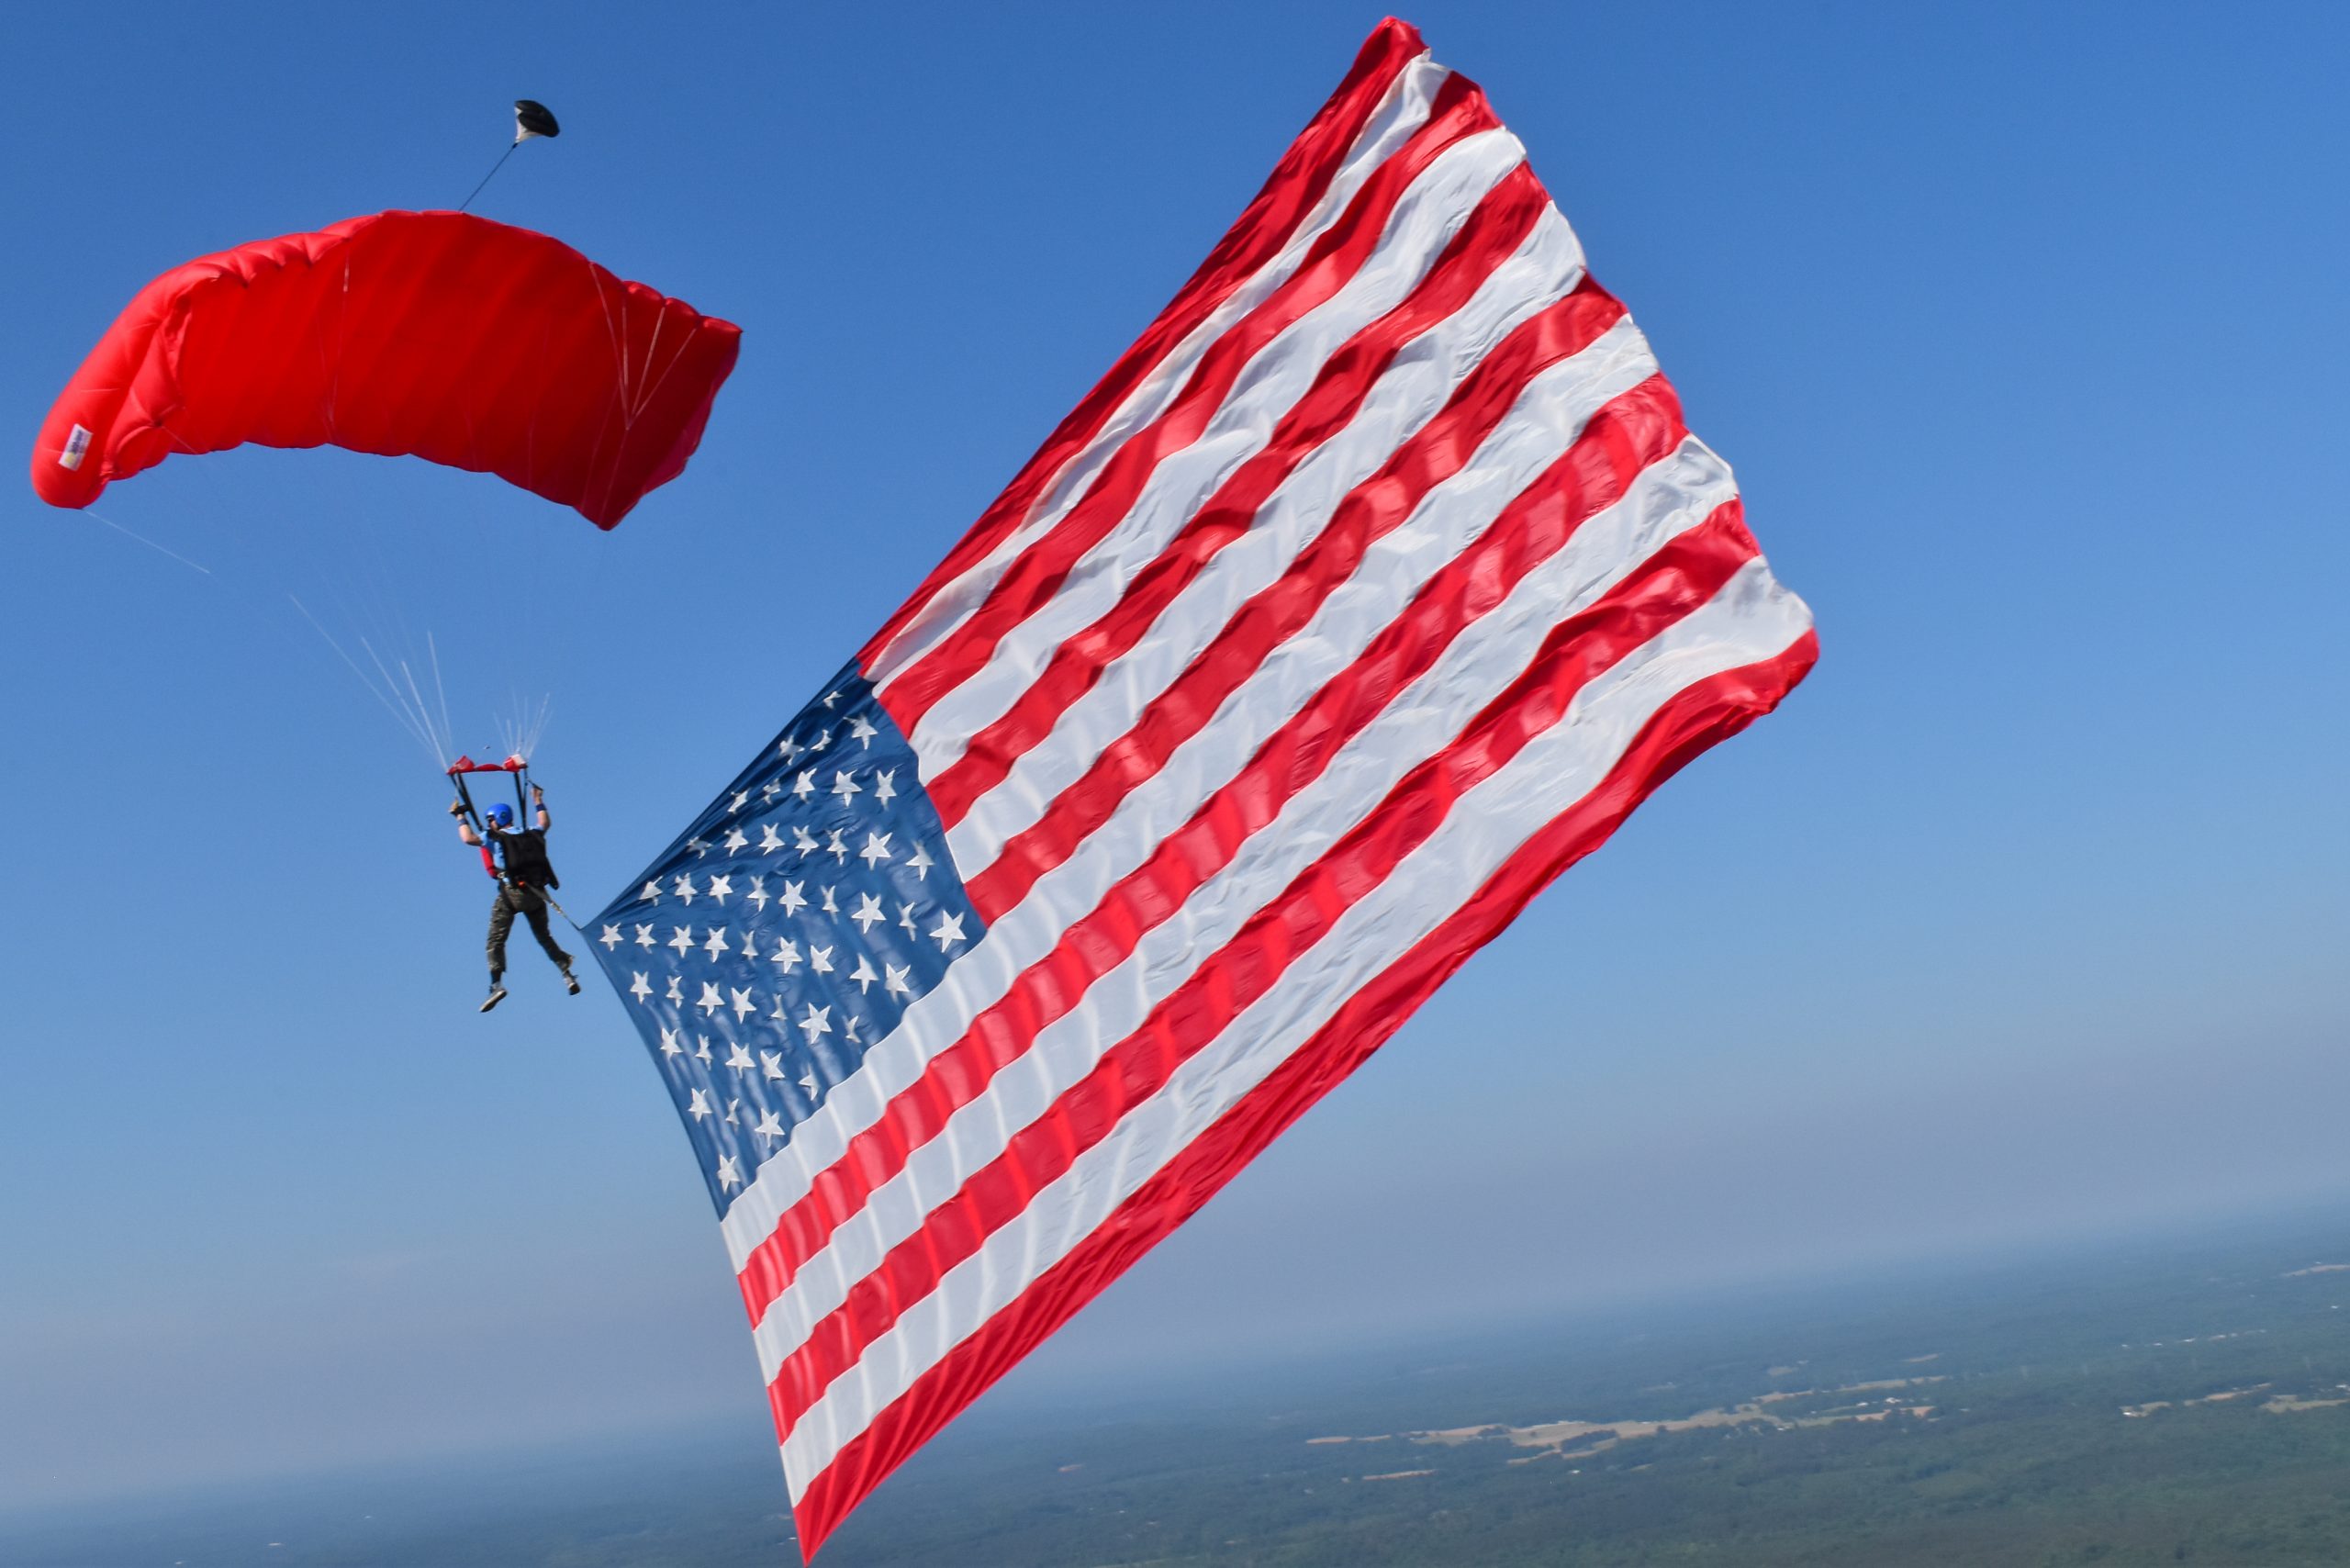  CarolinaFest, held at Skydive Carolina, is one of the premier skydiving events held in the United States.  More than 450 jumpers will typically exceed 6,000 jumps over six days. Each day begins with a “flag jump.” Photography courtesy of Quincy  A. Kennedy, IV.